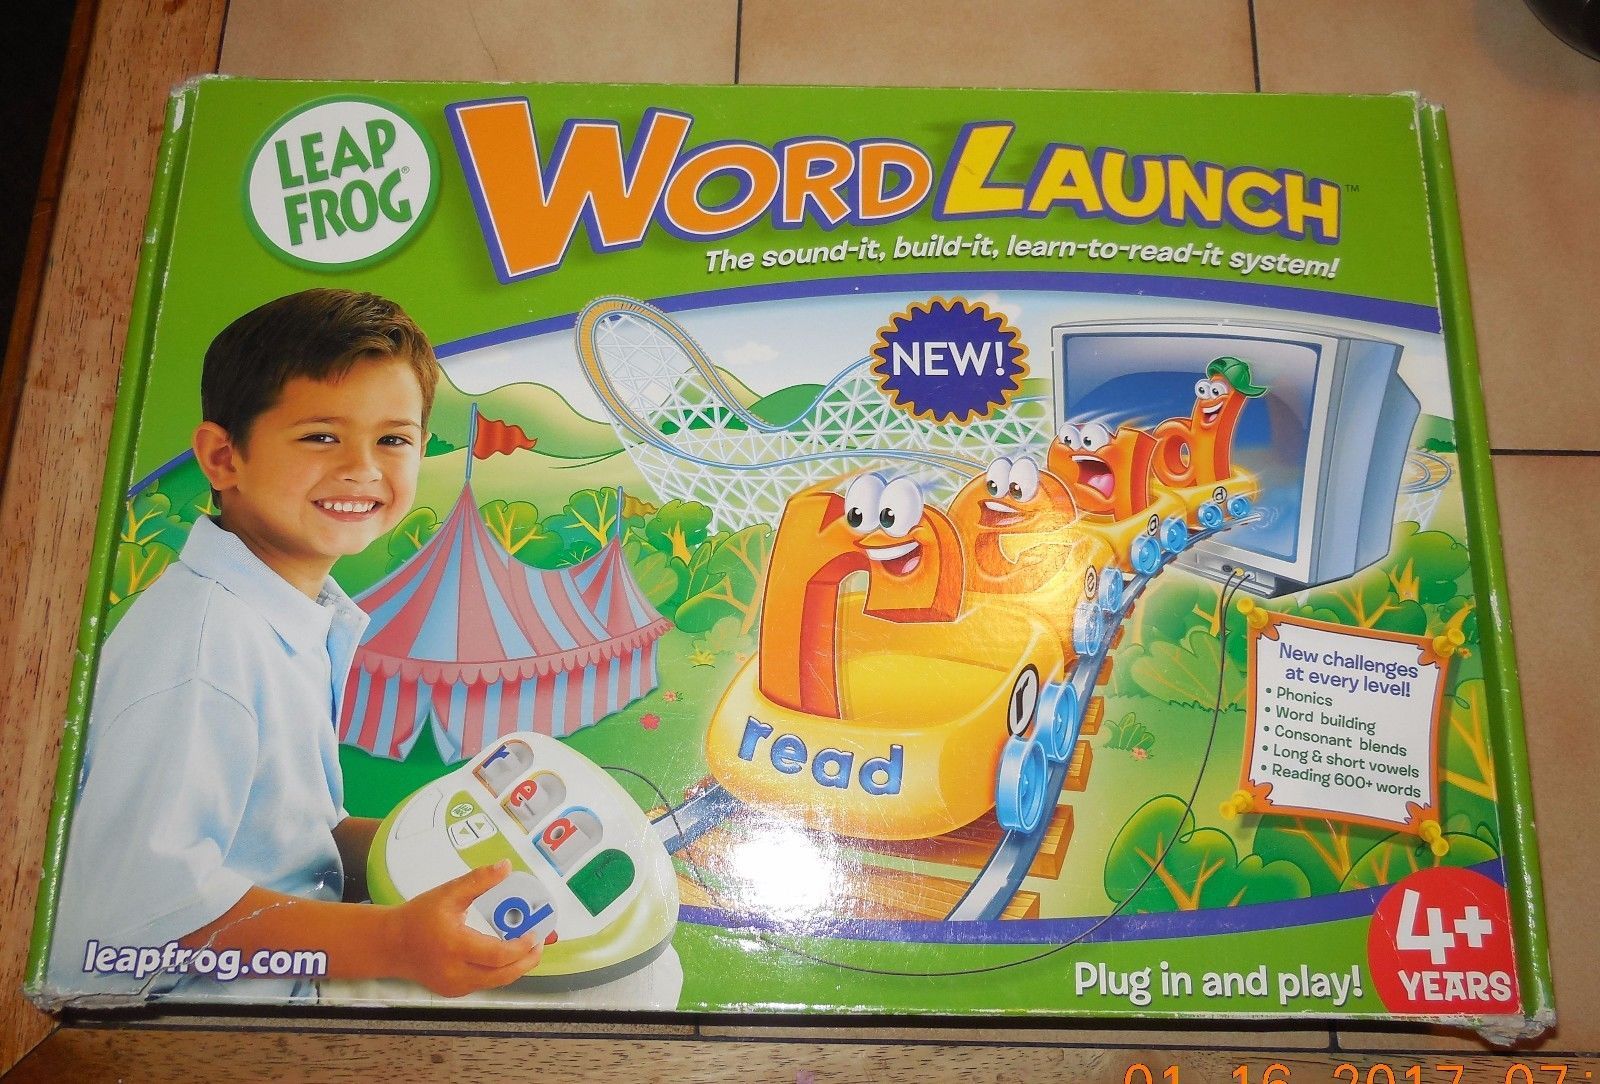 Word Building & More Phonics Complete Working Leap Frog Word Launch System 